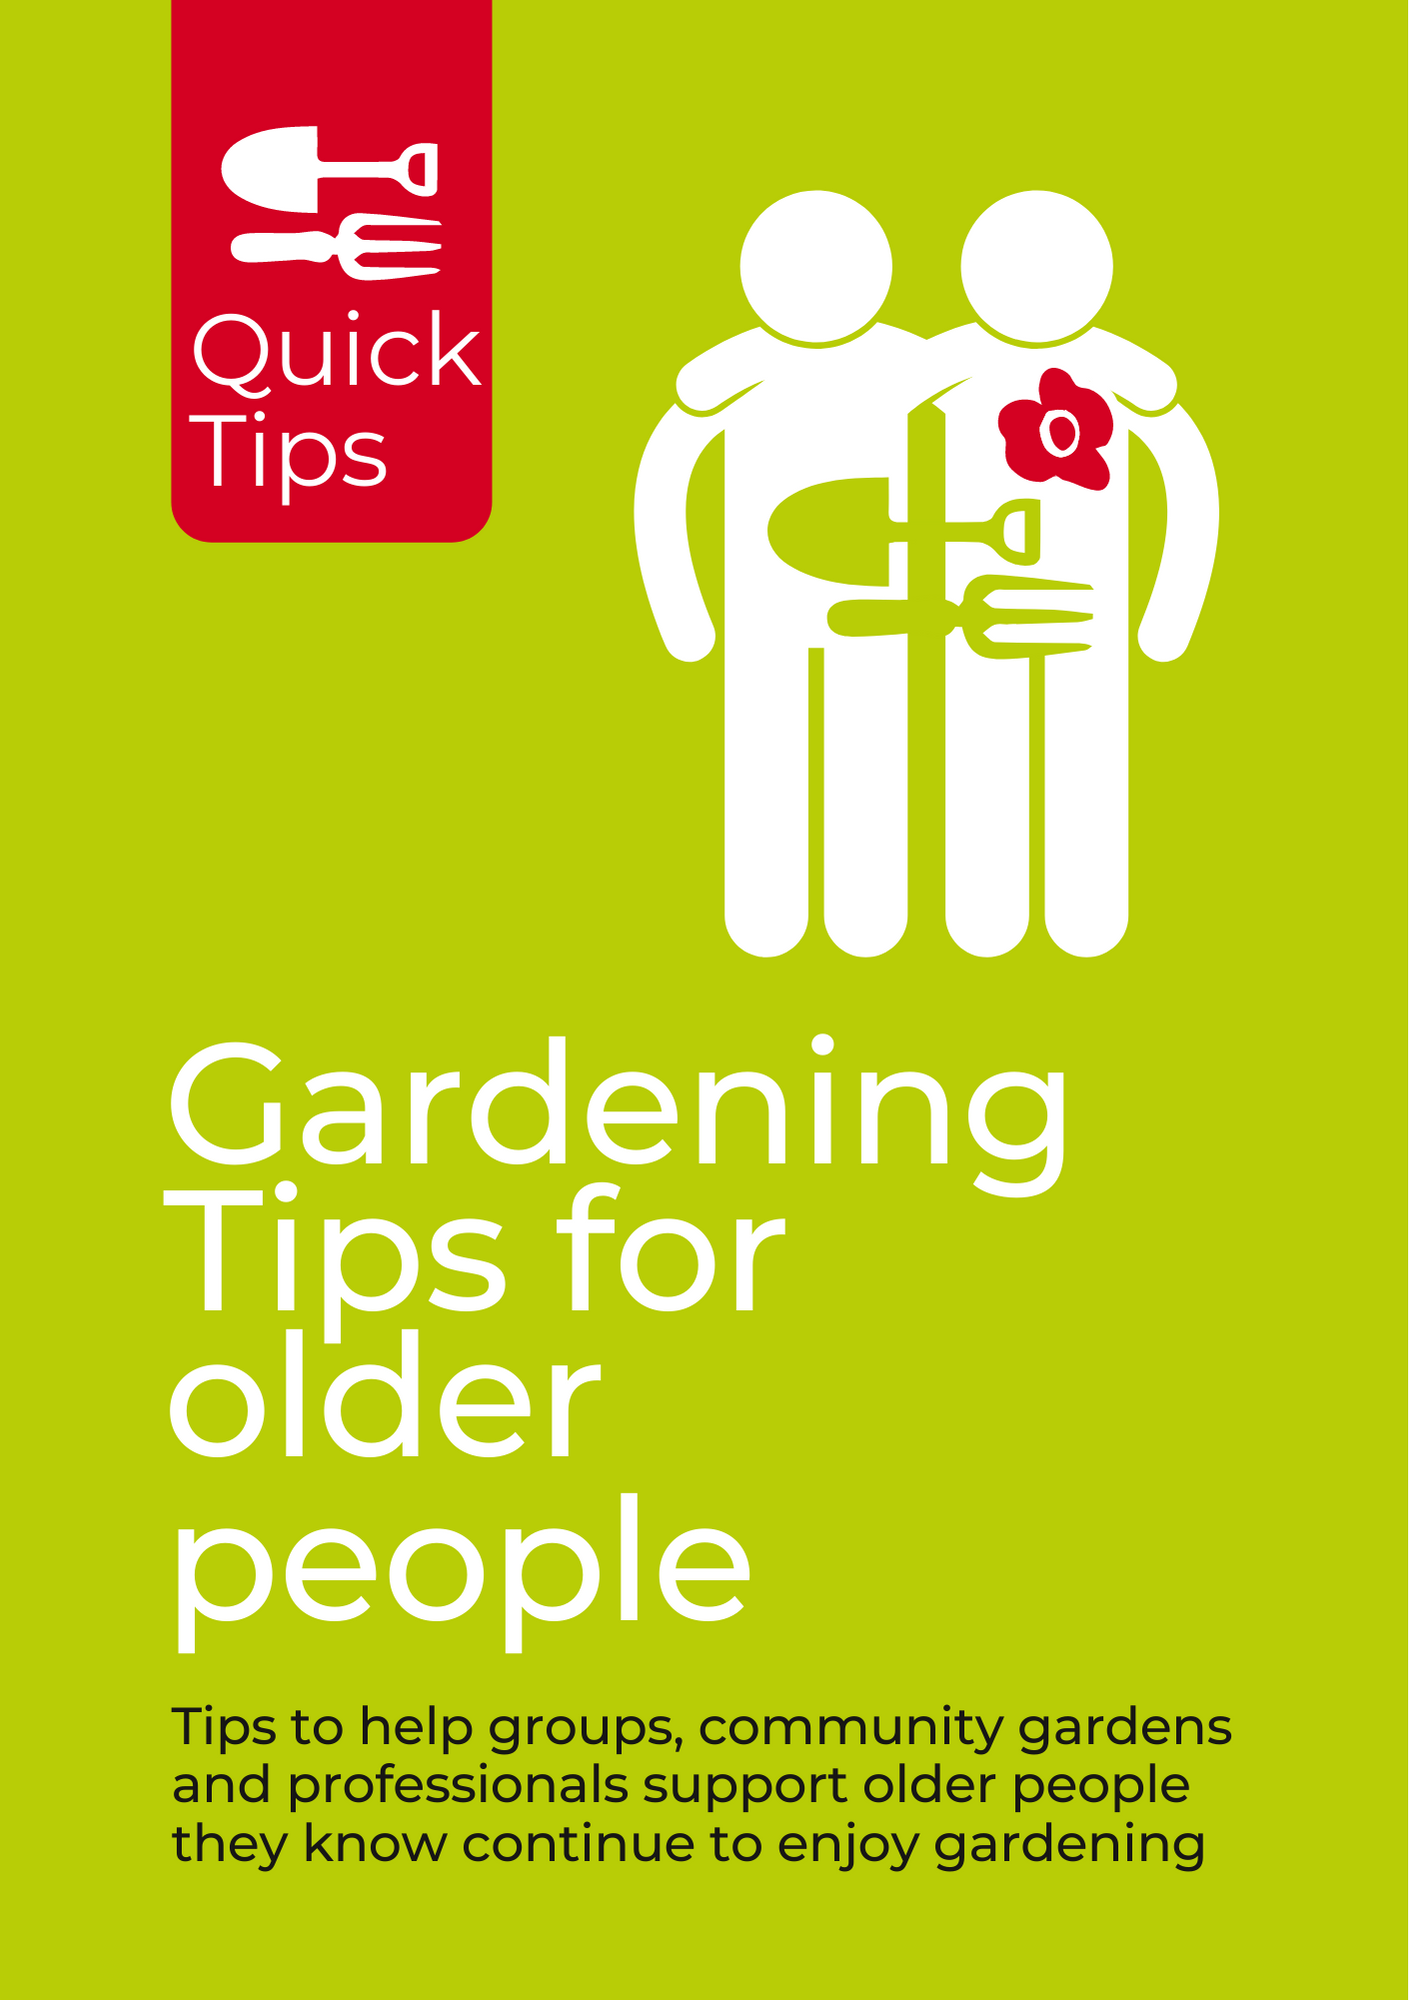 Gardening tips for older people. Tips to help groups, community gardens and professionals support older people they know continue to enjoy gardening